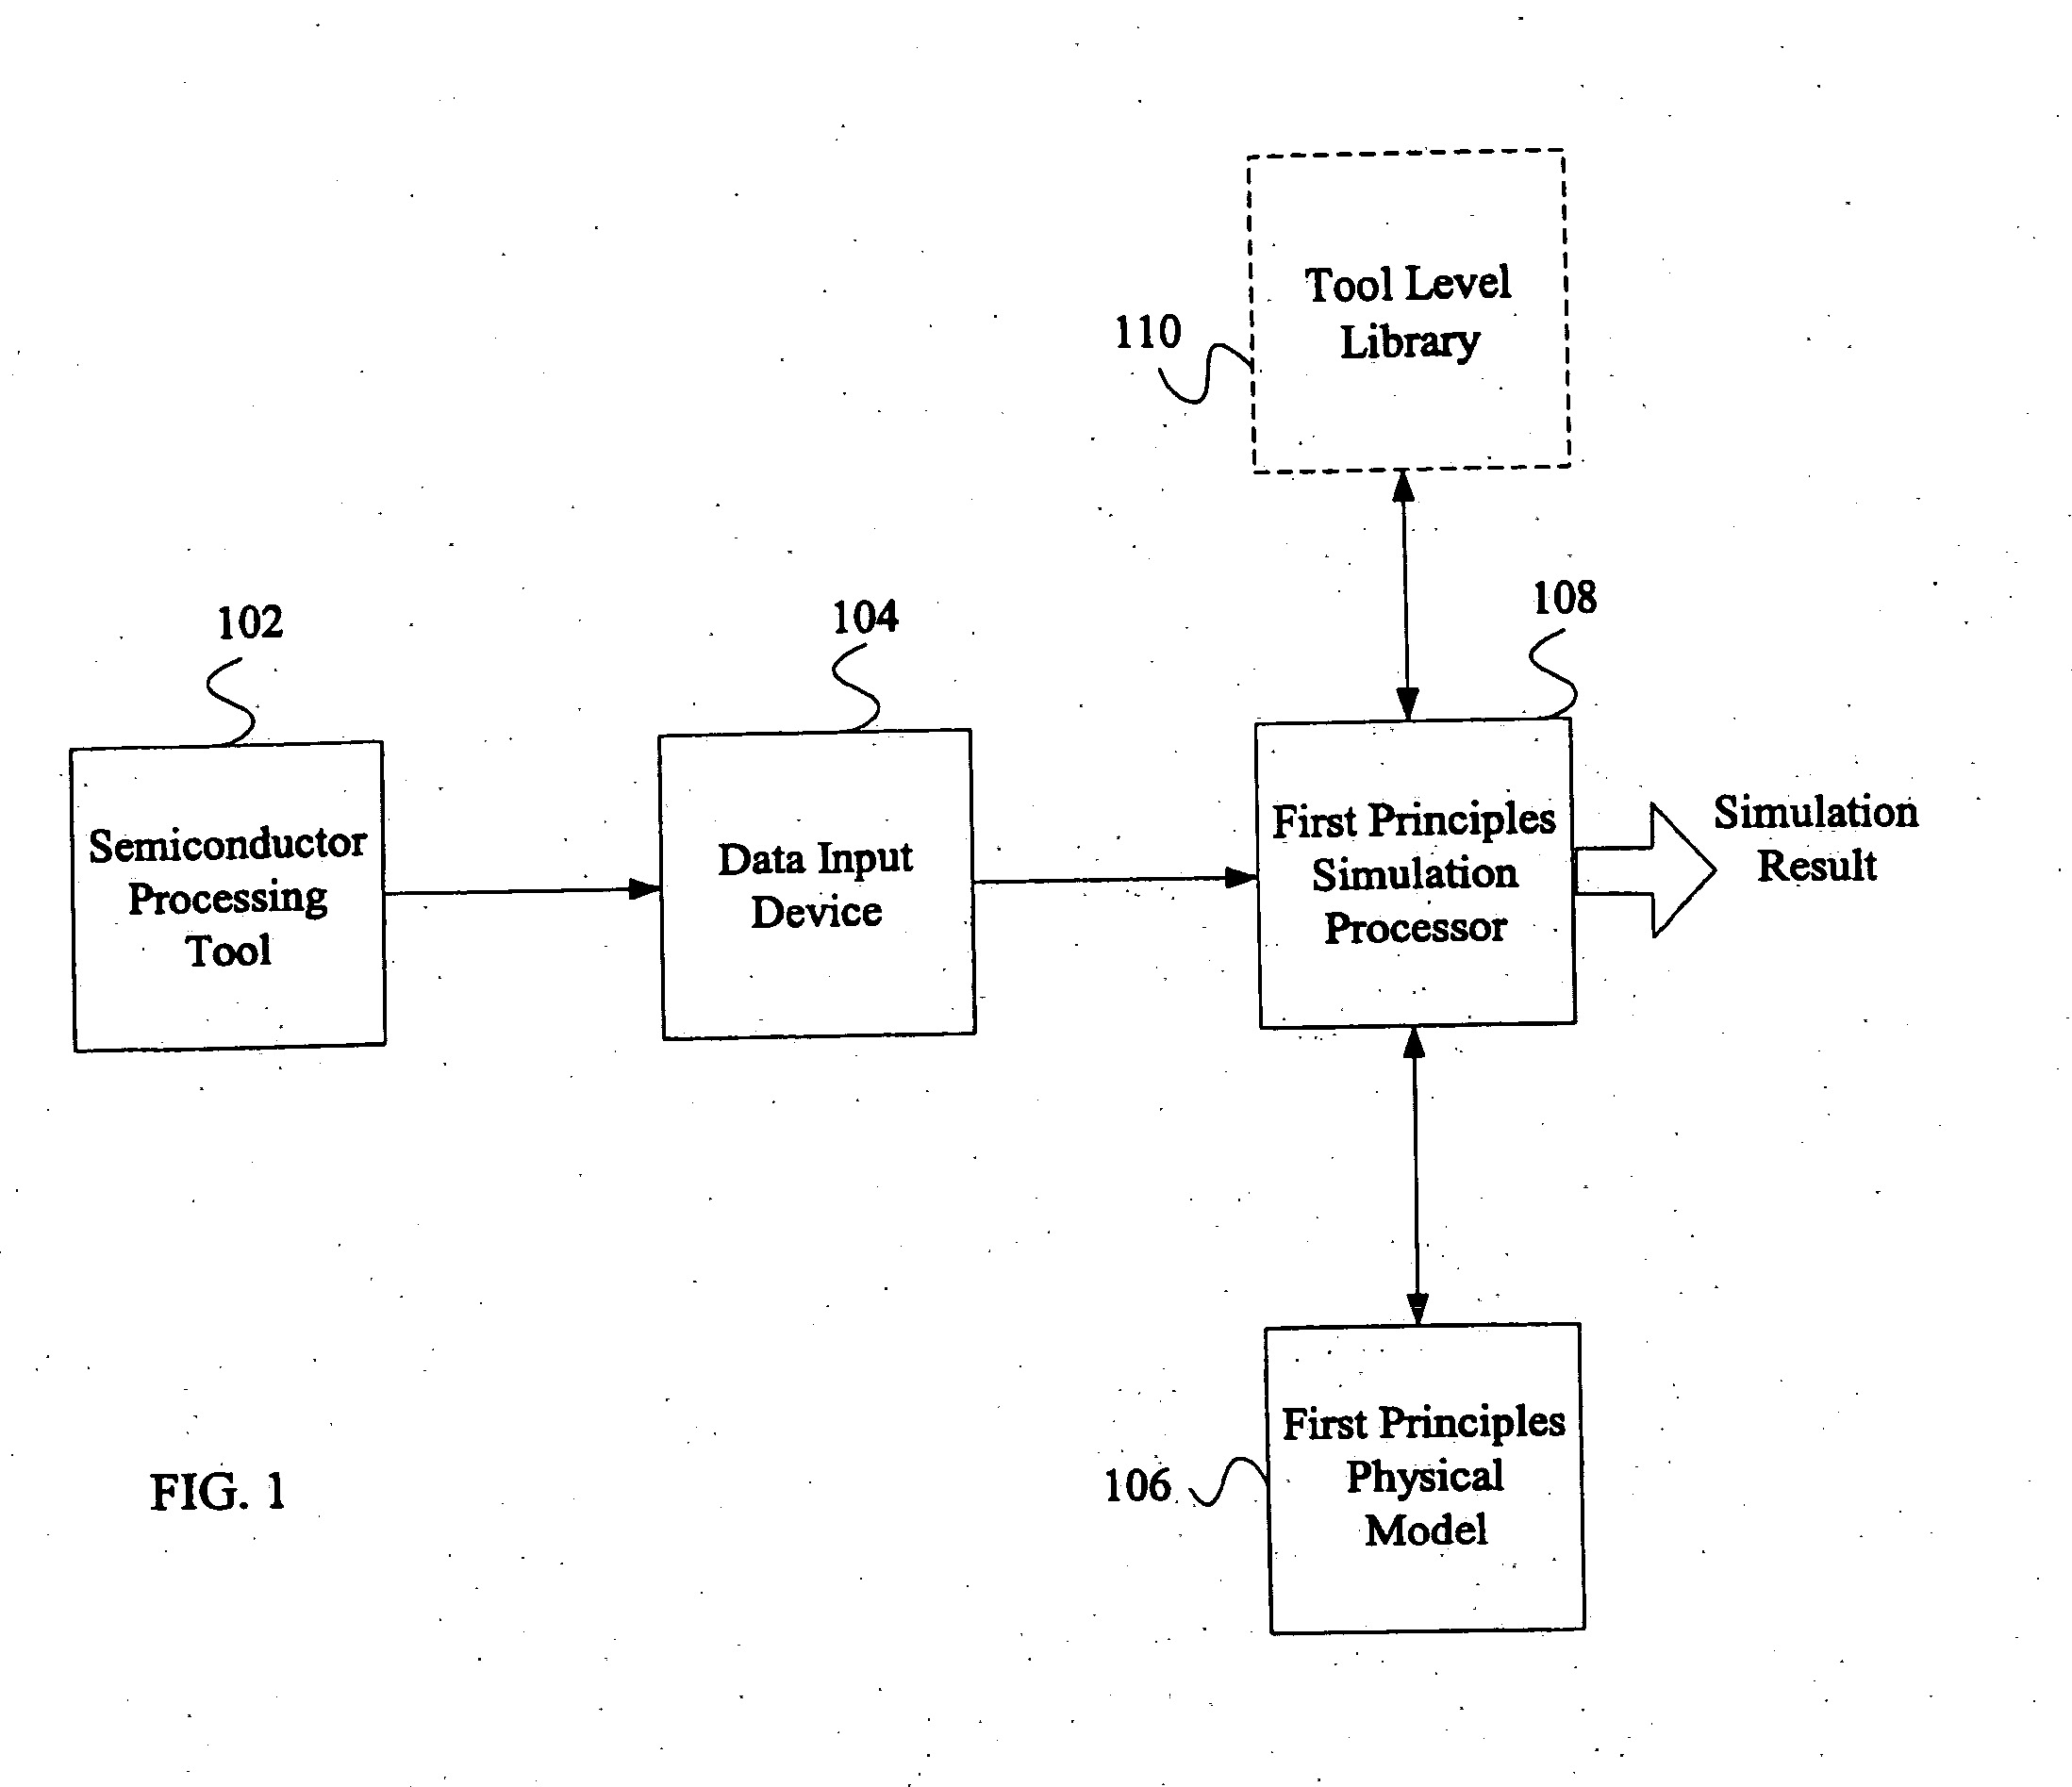 System and method for using first-principles simulation to analyze a process performed by a semiconductor processing tool